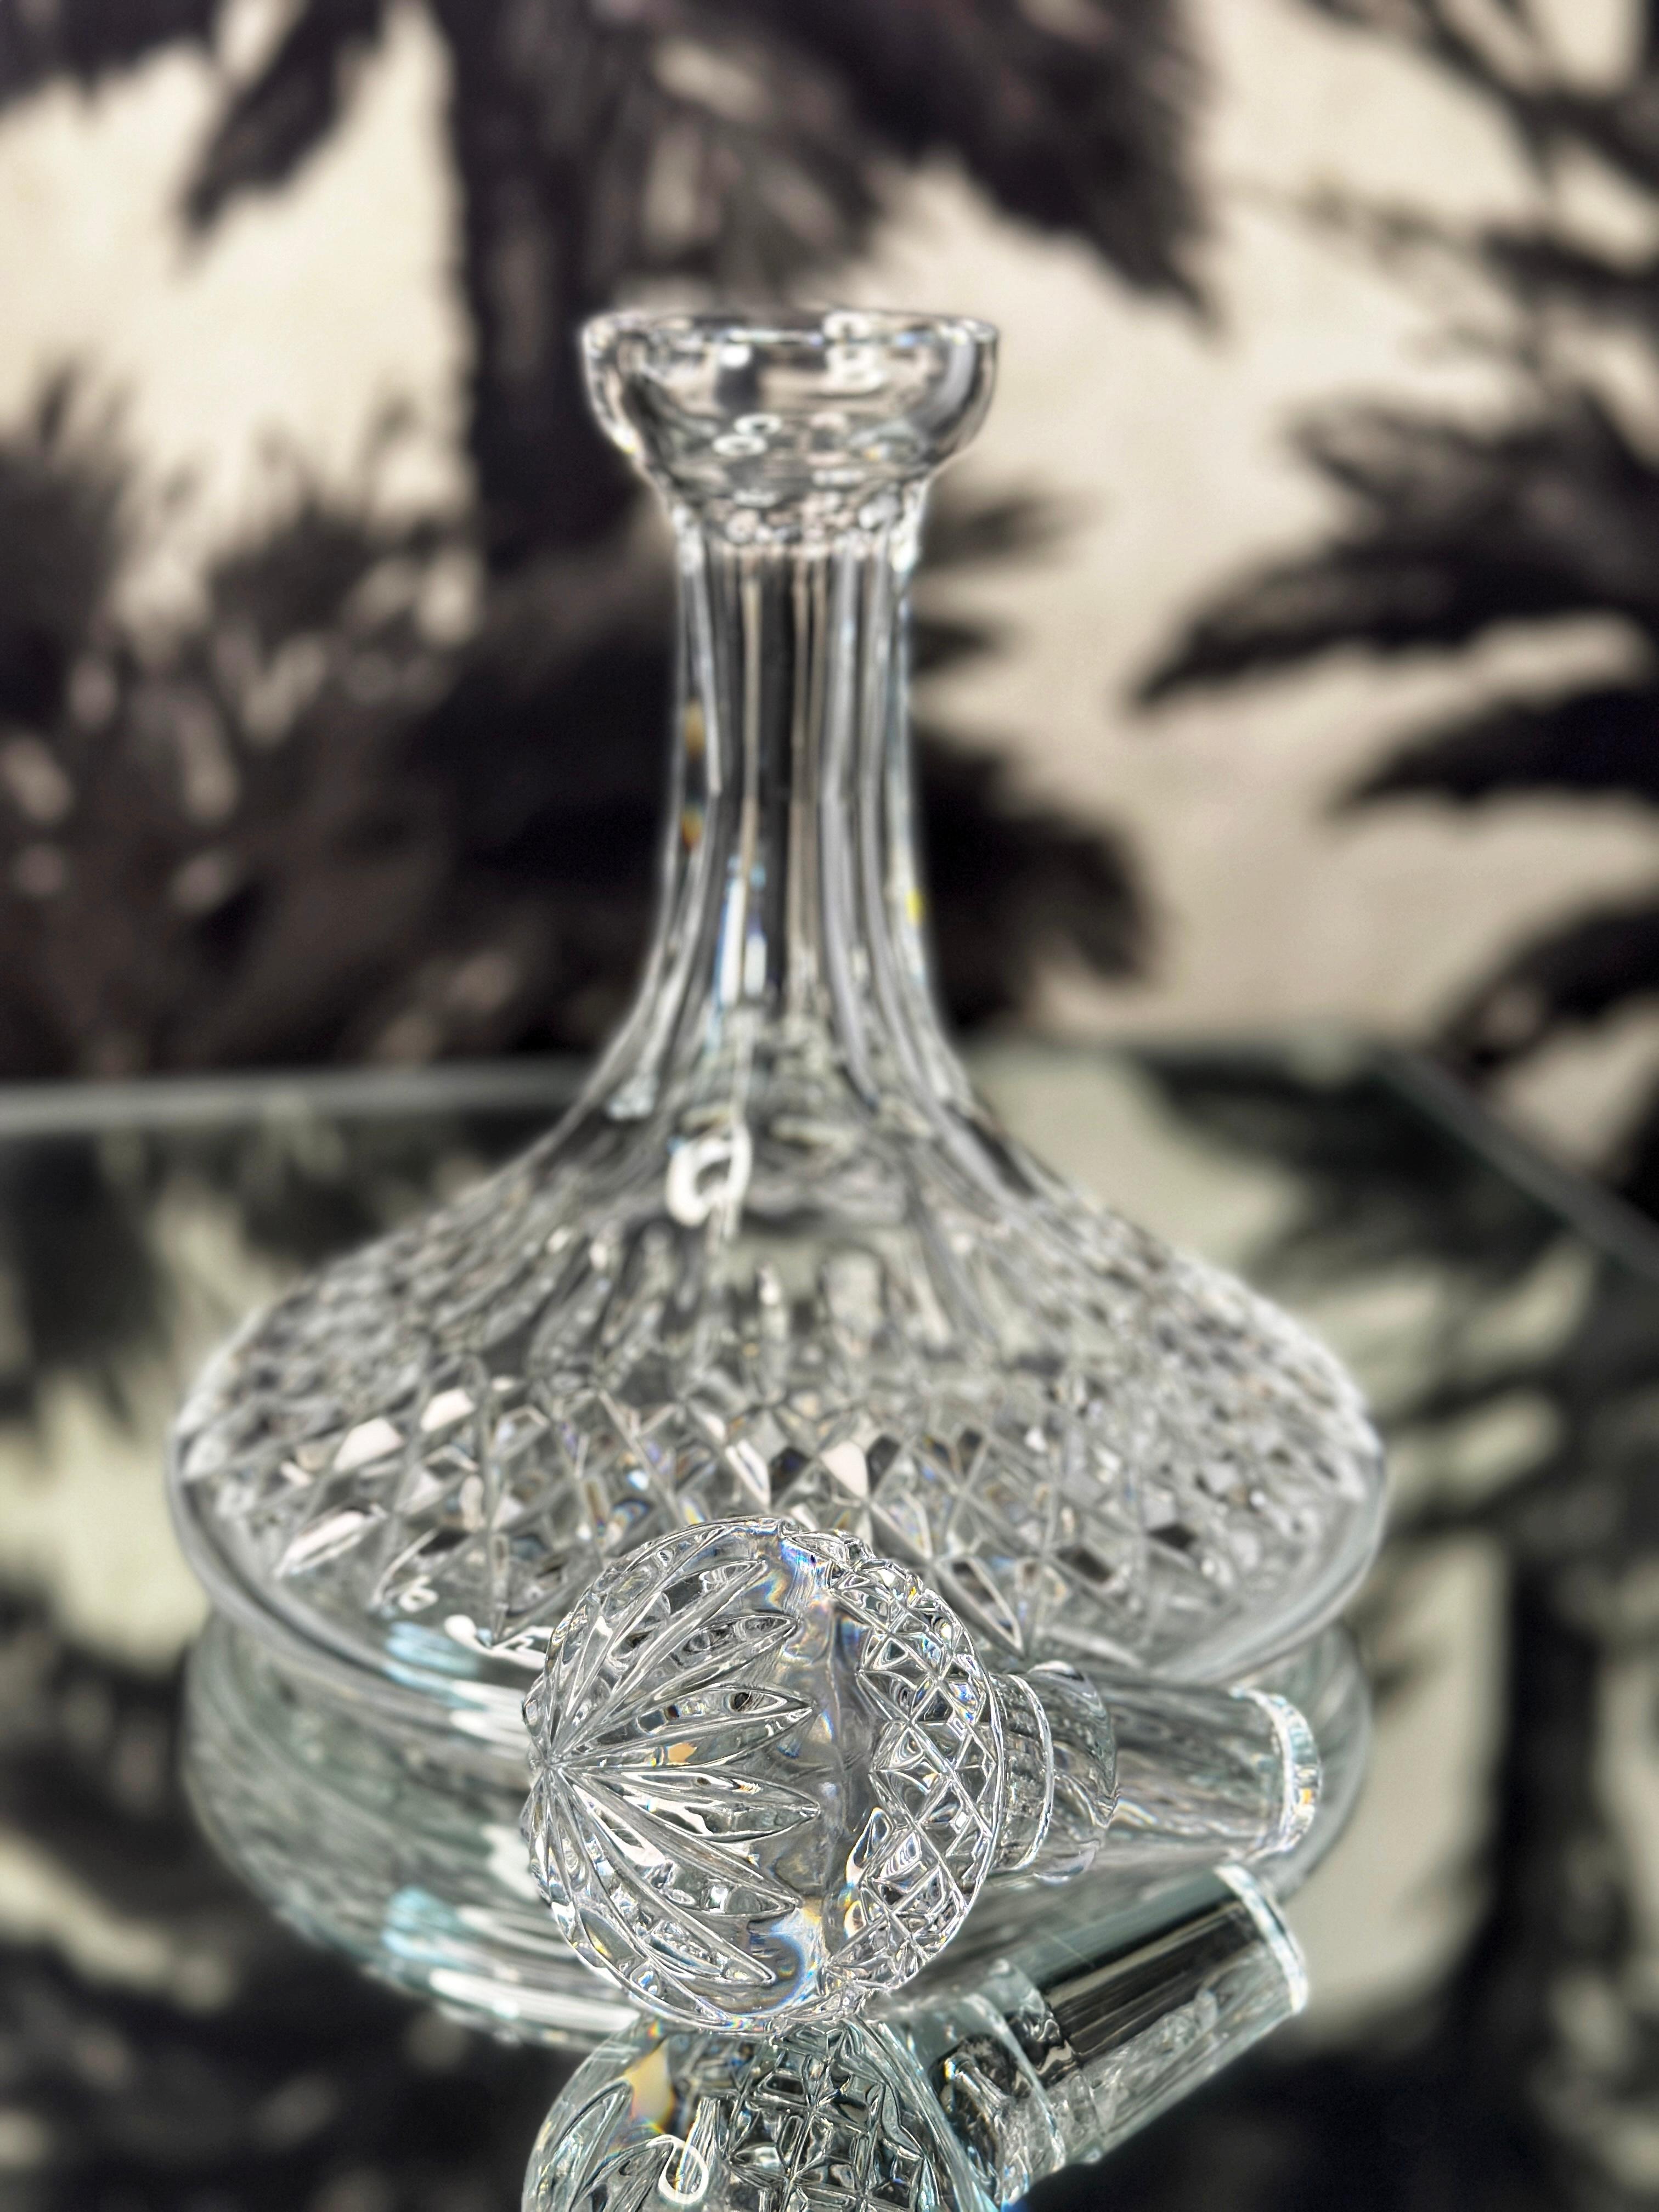 Late 20th Century Vintage Waterford Crystal Ships Decanter with Etched Diamond Cuts, c. 1970's